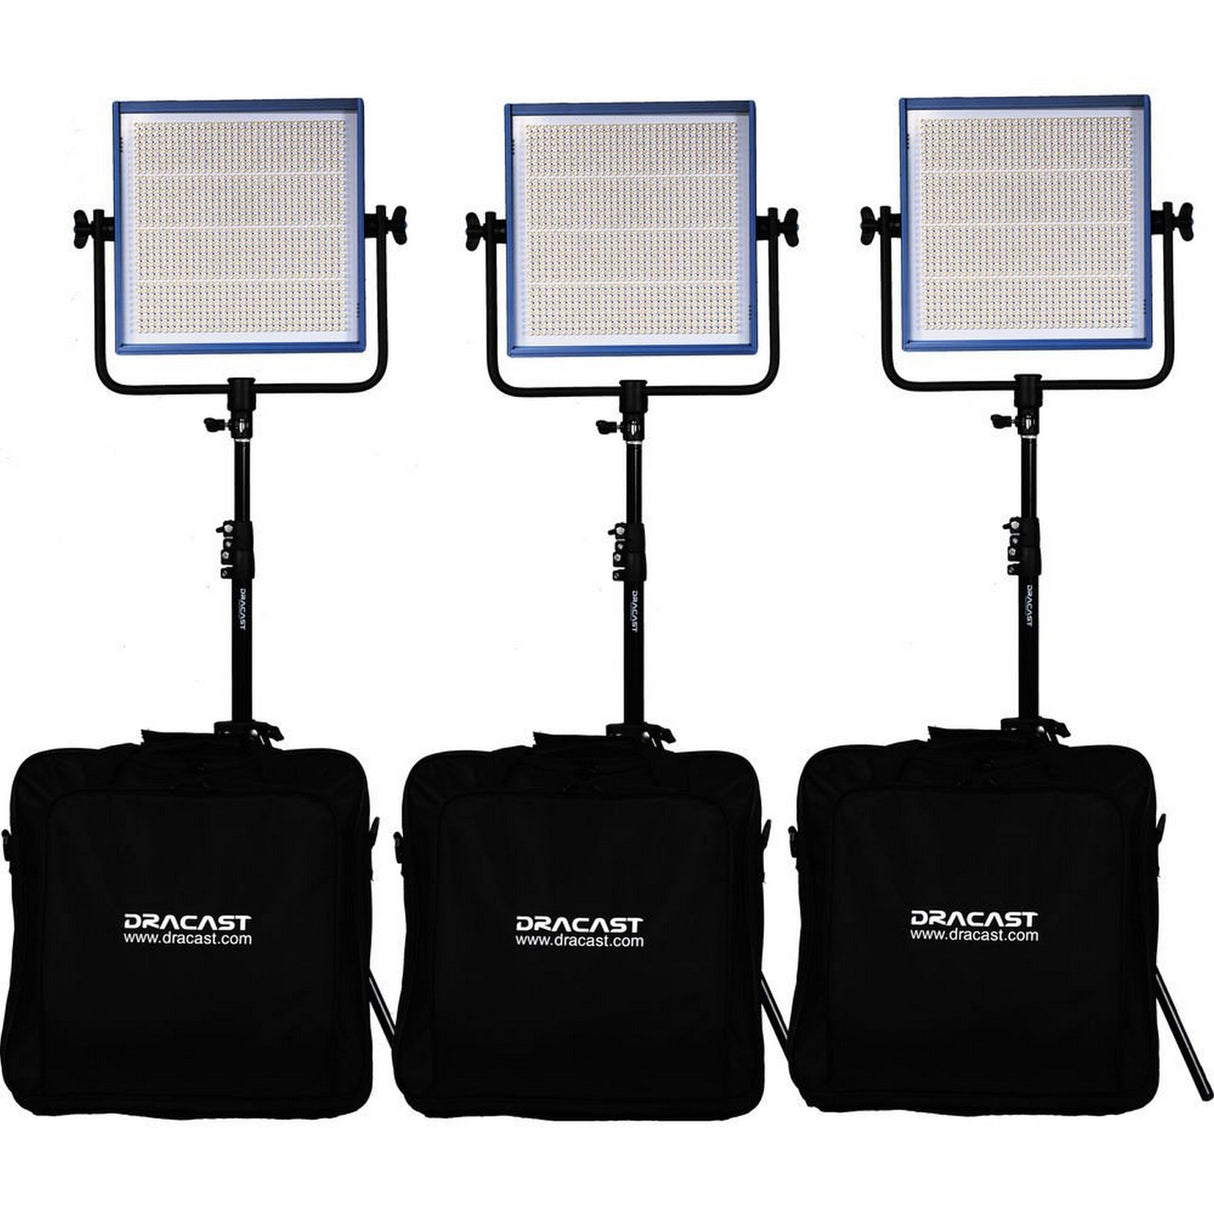 Dracast DRLK3X1000DK LED1000 Pro Series Daylight 3 Light Kit with V-Mount Battery Plates and Light Stands